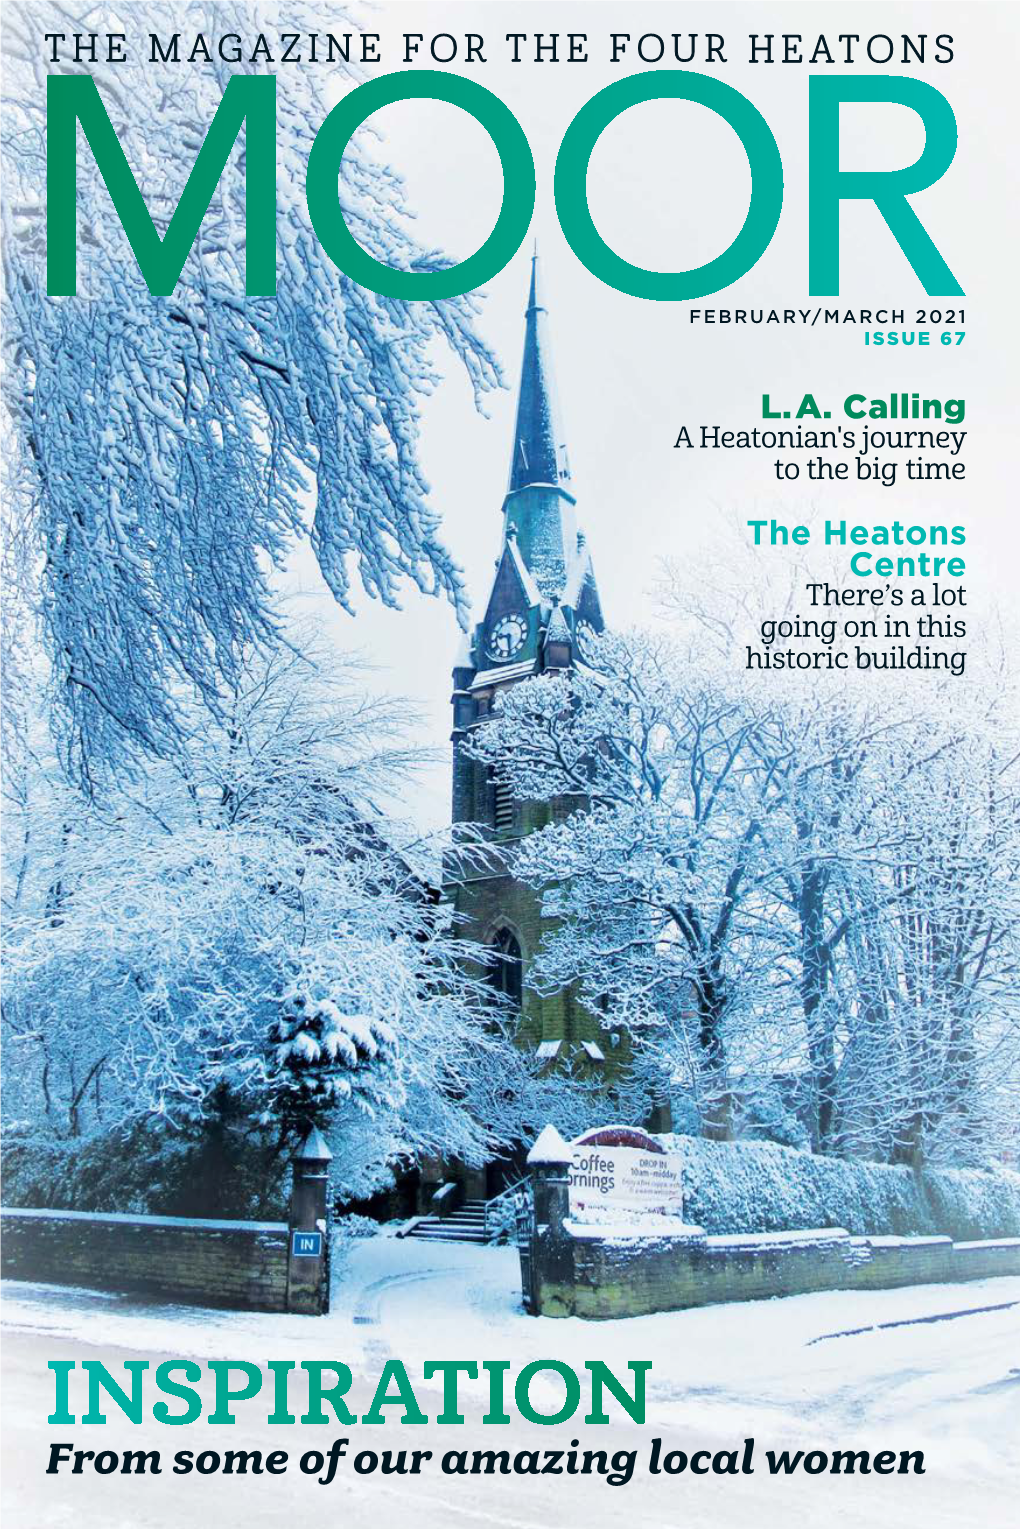 Moor Issue 67 Cover.Indd 1 08/01/2021 09:39 We Supply and Fit Both German and British Ranges of Kitchens